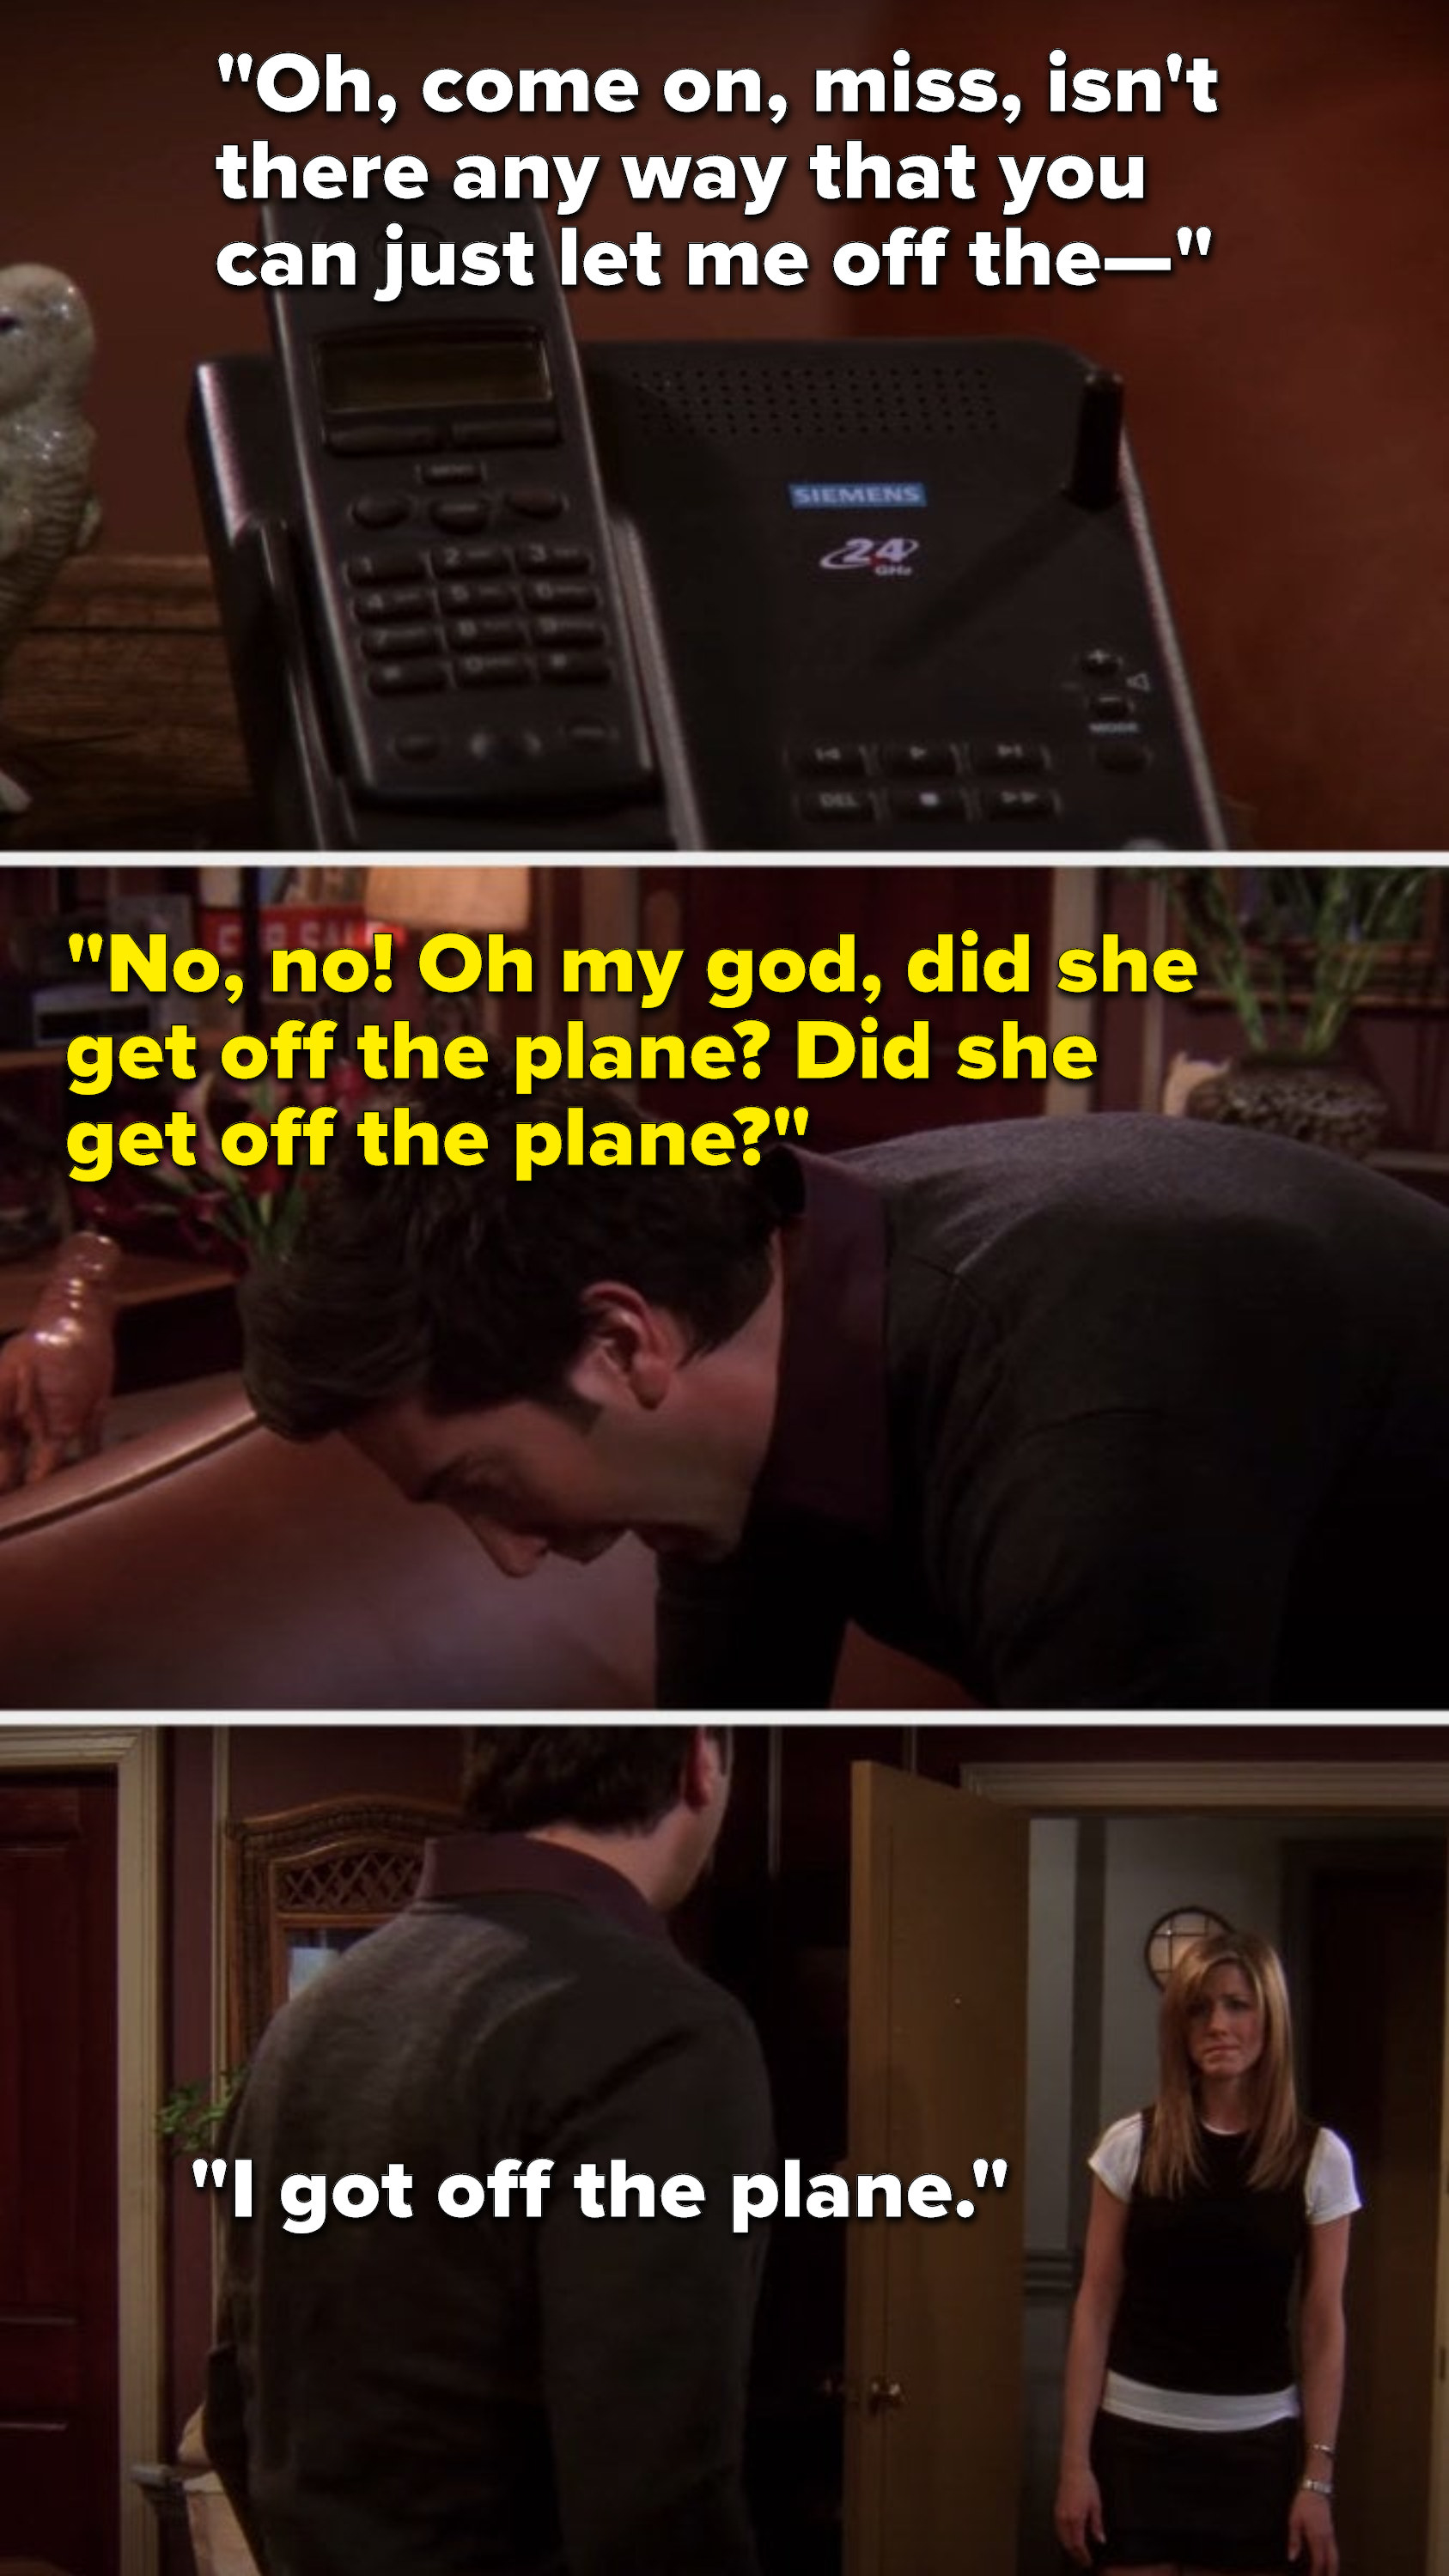 Rachel in her message says, &quot;Oh, come on, miss, isn&#x27;t there any way that you can just let me off the—&quot; Ross says, &quot;No, no, oh my god, did she get off the plane, did she get off the plane,&quot; and Rachel shows up in his doorway and says, &quot;I got off the plane&quot;